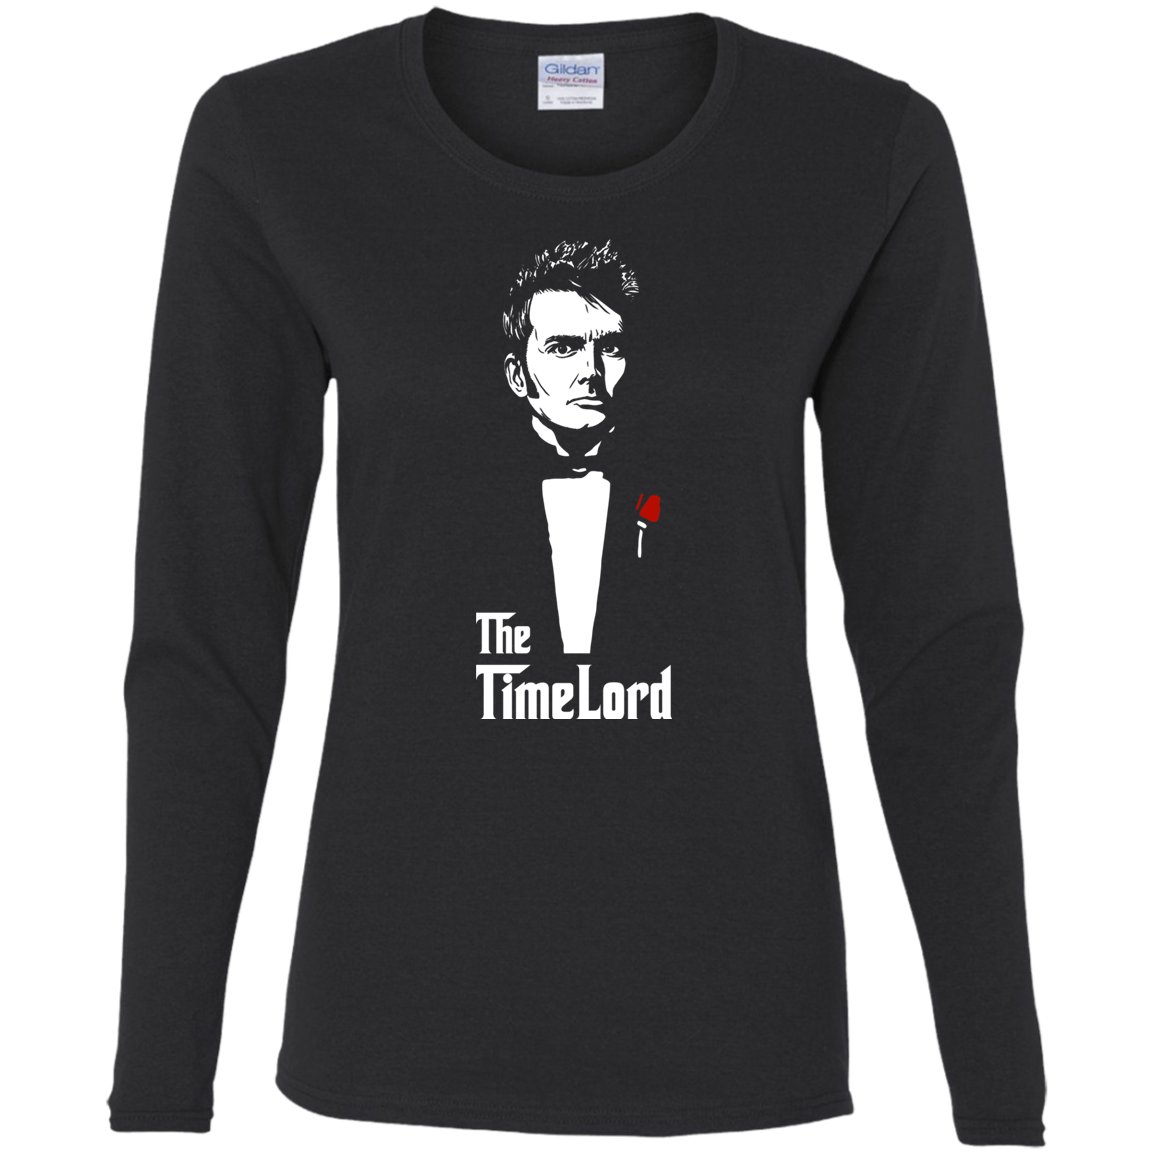 The Time Lord Women's Long Sleeve T-Shirt